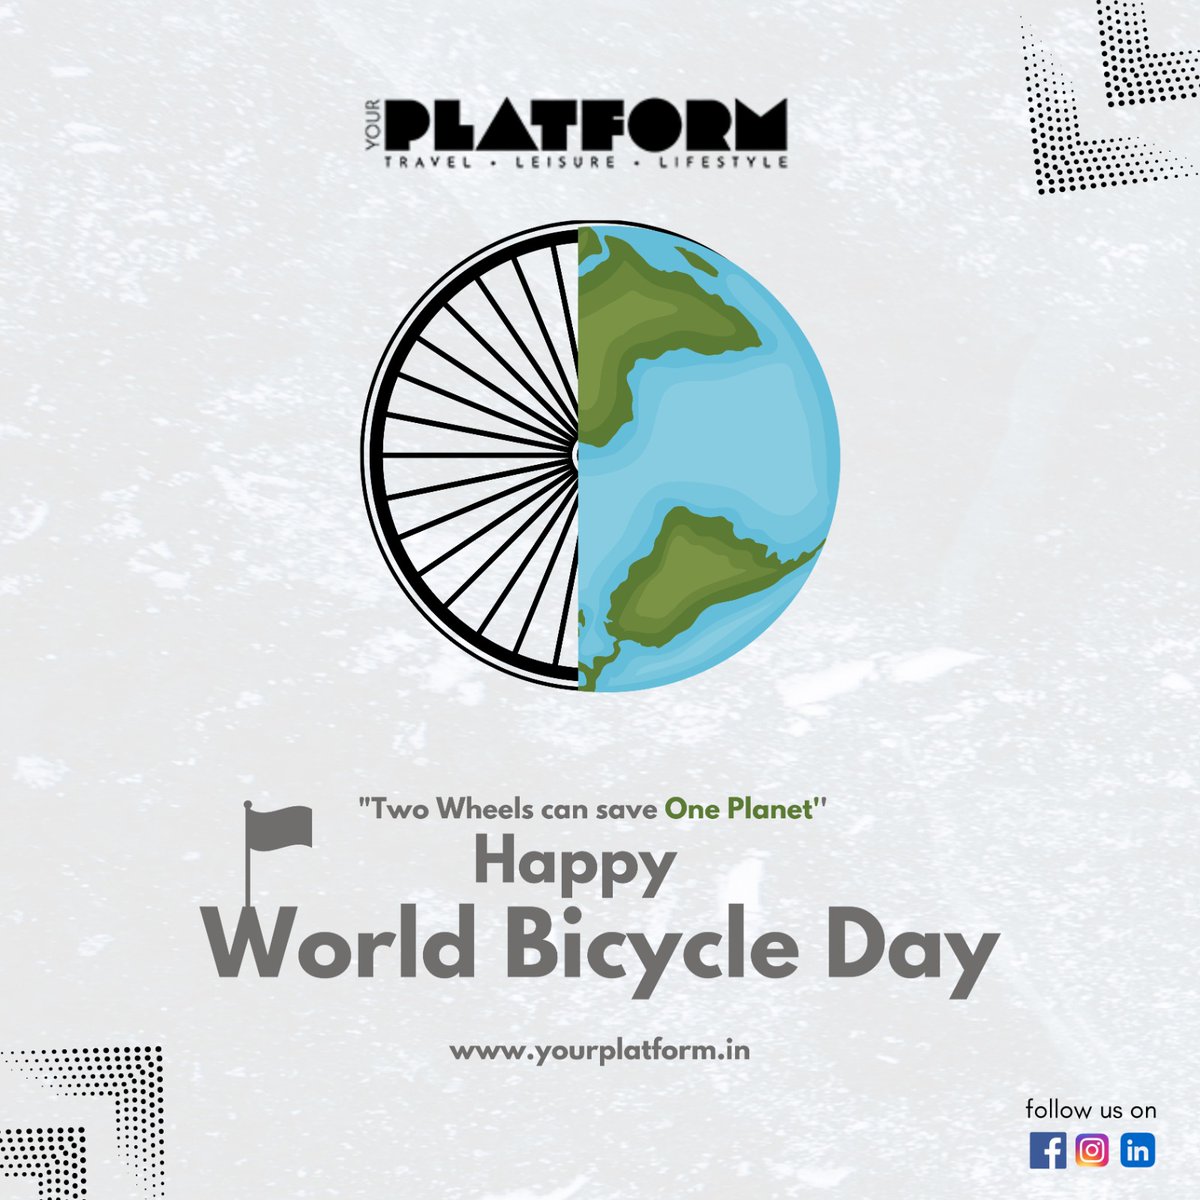 'Let's celebrate the simple joy of riding a bicycle and the positive impact it has on our planet. Happy World Bicycle Day! 📷📷'#yourplatformin #bicyclelifestyle
#PedalPower
#bikelovers
#cyclingcommunity
#bikeeverywhere
#twowheels
#environment
#greenplanet